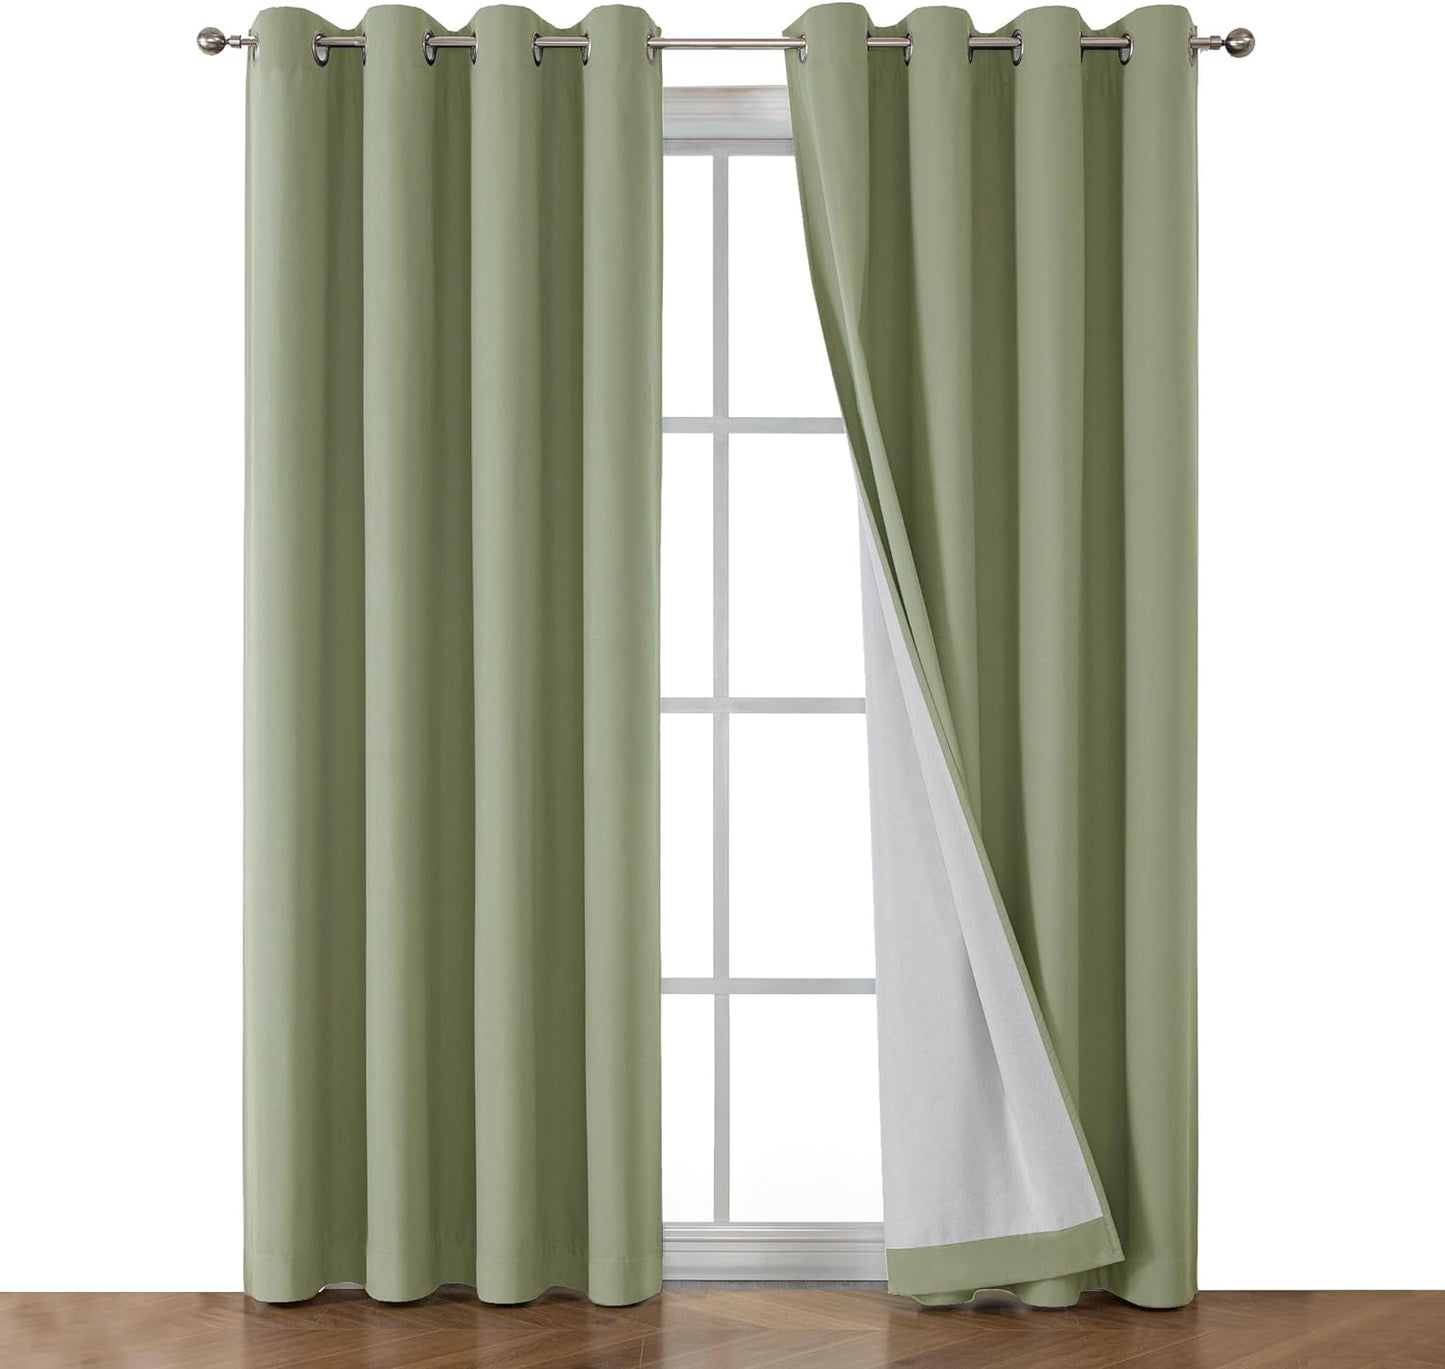 OWENIE Maya 100% Blackout Curtains 84 Inch Length 2 Panels Set, Greyish White Solid Heavy Thermal Insulated Grommets Curtains for Bedroom & Living Room, 2 Panels (Each 52 W X 84 L,Greyish White)  OWENIE Sage Green 52W X 84L 